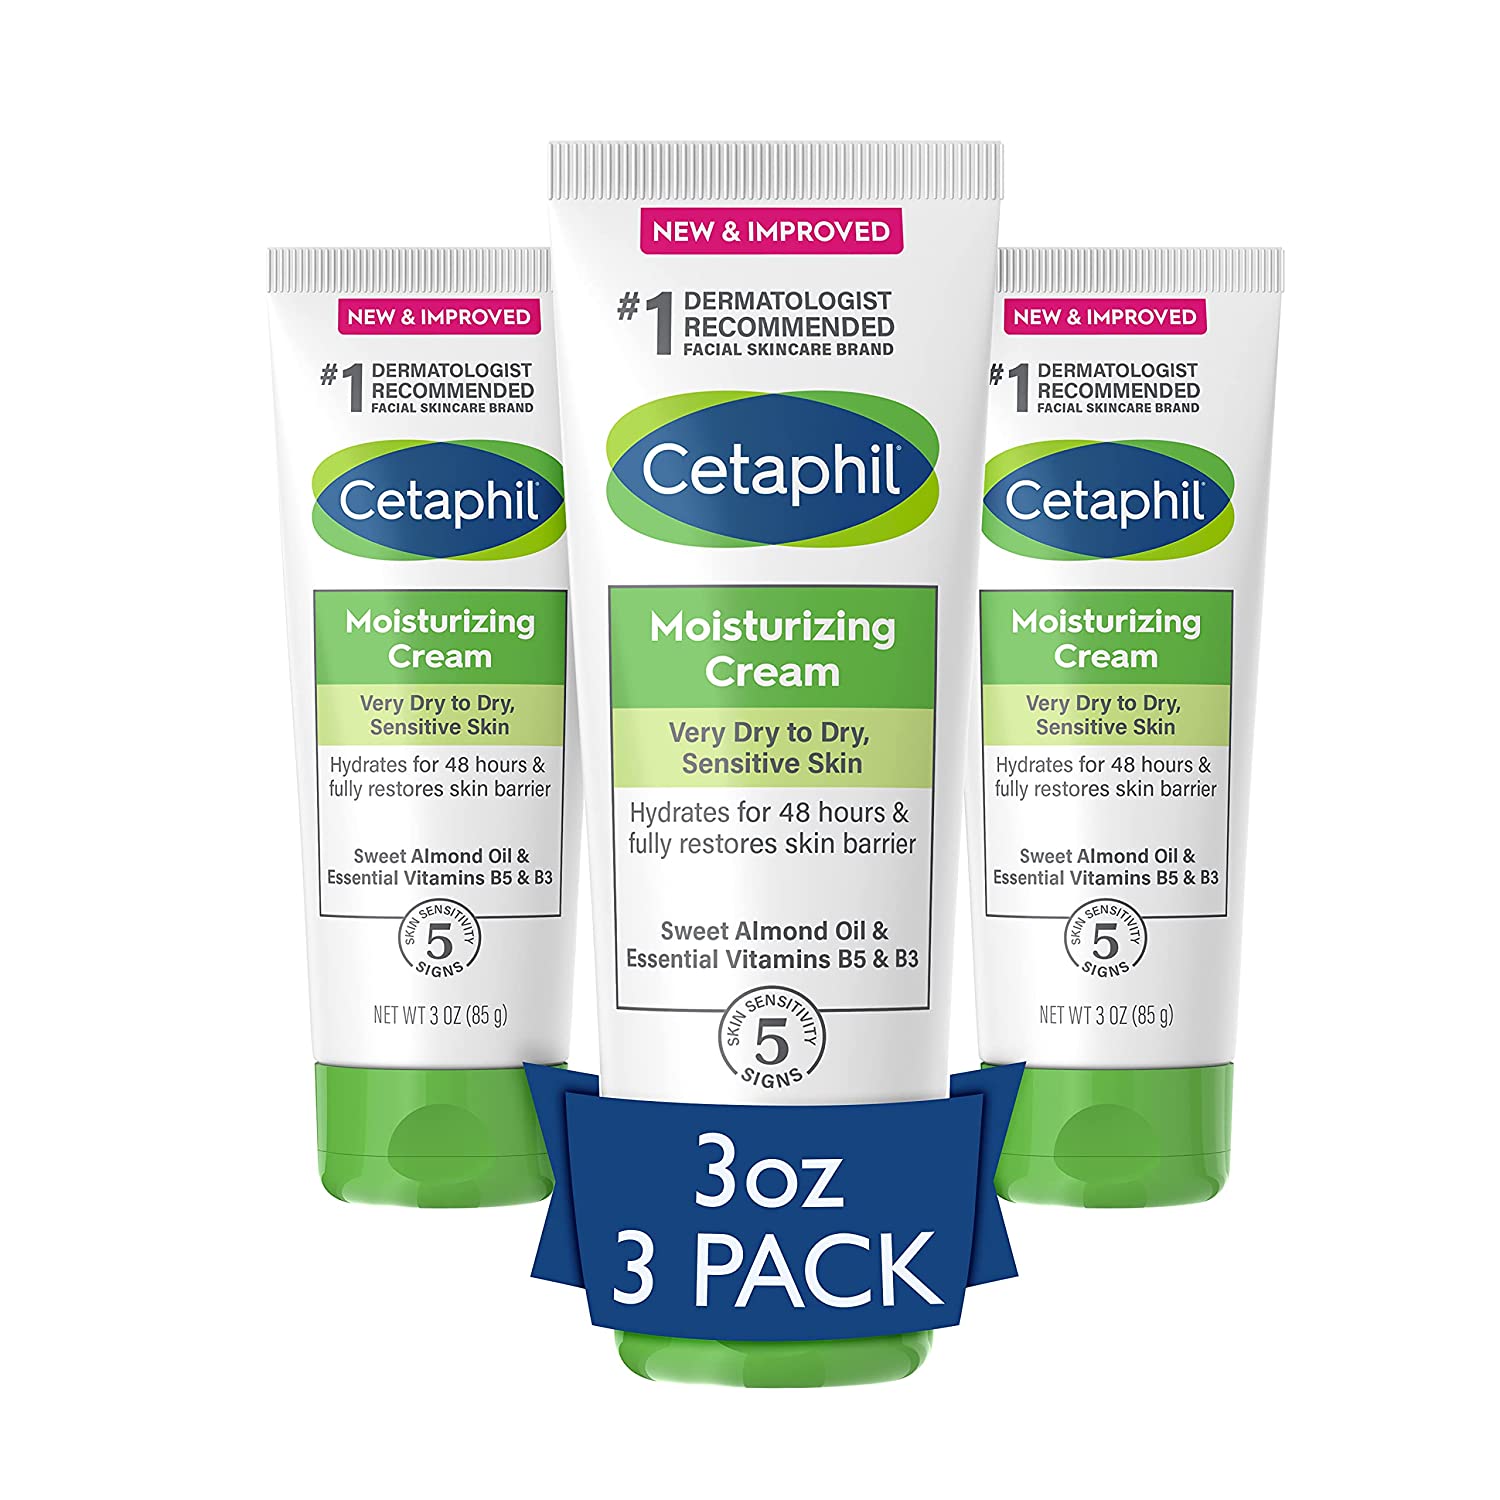 CETAPHIL Hydrating Moisturizing Cream for Dry to Very Dry, Sensitive Skin, NEW 3 oz Pack of 3, Fragrance Free, Non-Comedogenic, Non-Greasy (YMMV)